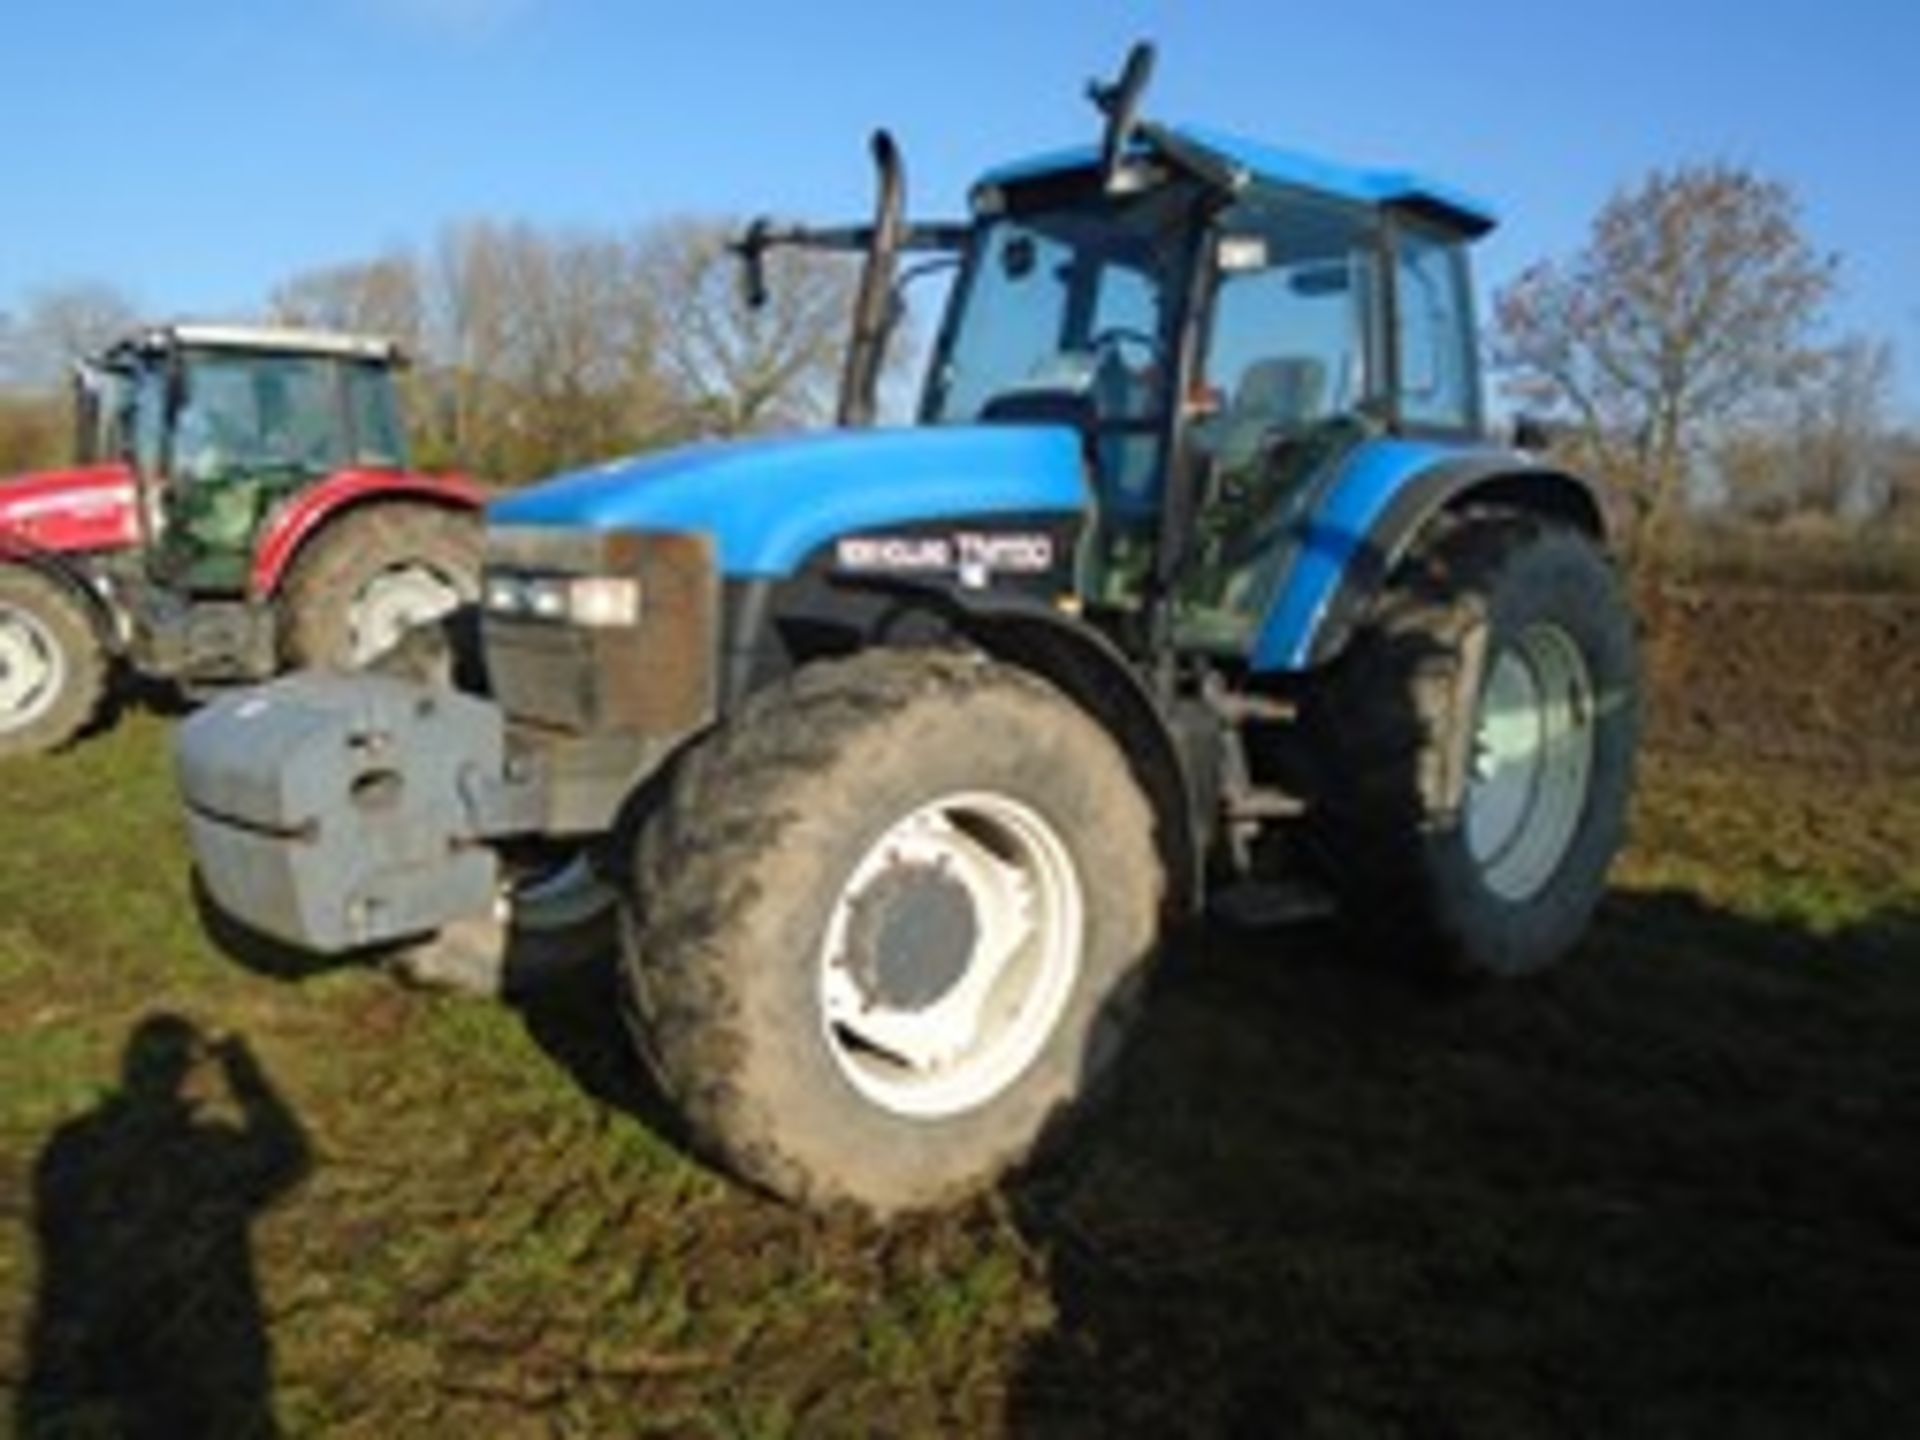 New Holland TM150 Y182 WKH 10,247hrs, 40km/h, Range Command transmission, air conditioning, CD